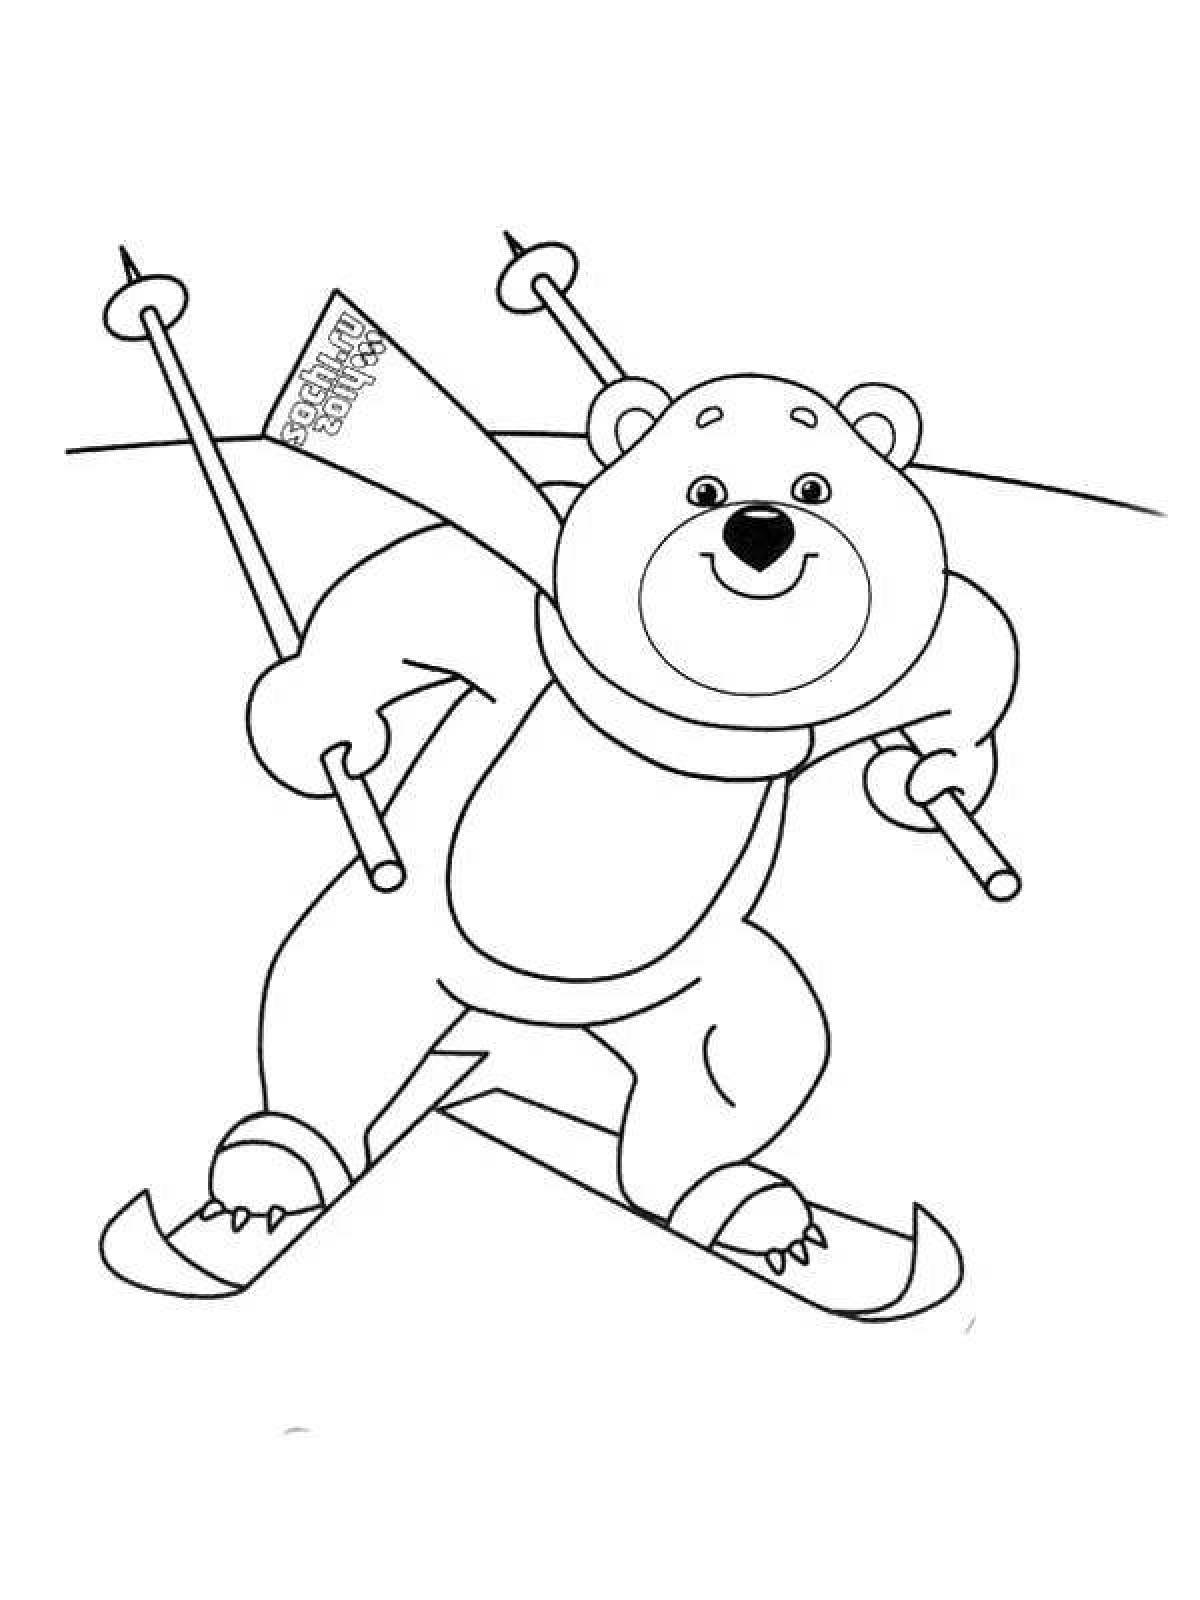 Joyful winter olympic sports coloring page